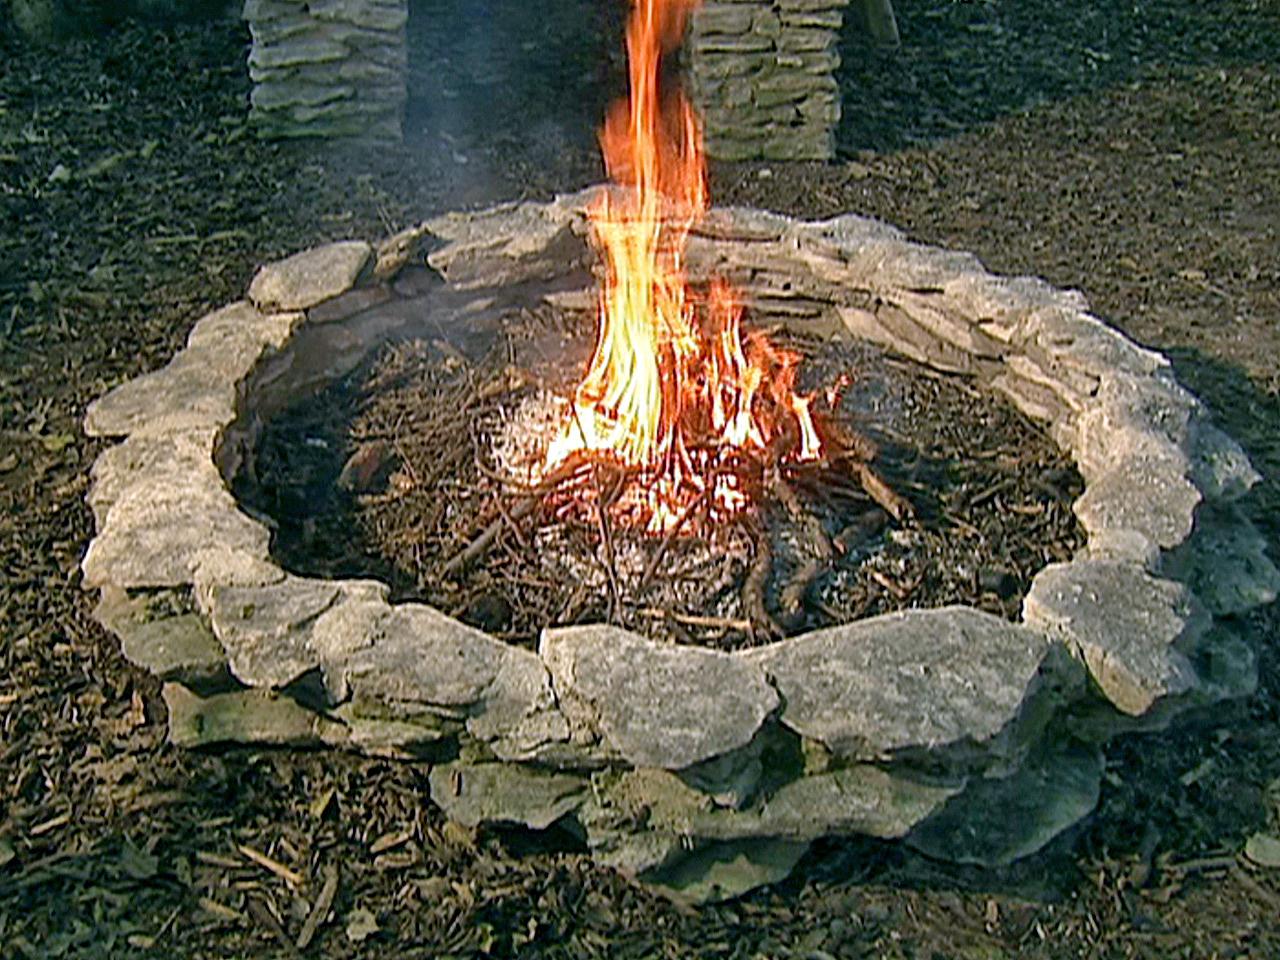 Outdoor Fire Pits And Pit Safety, Fire Pit Safety